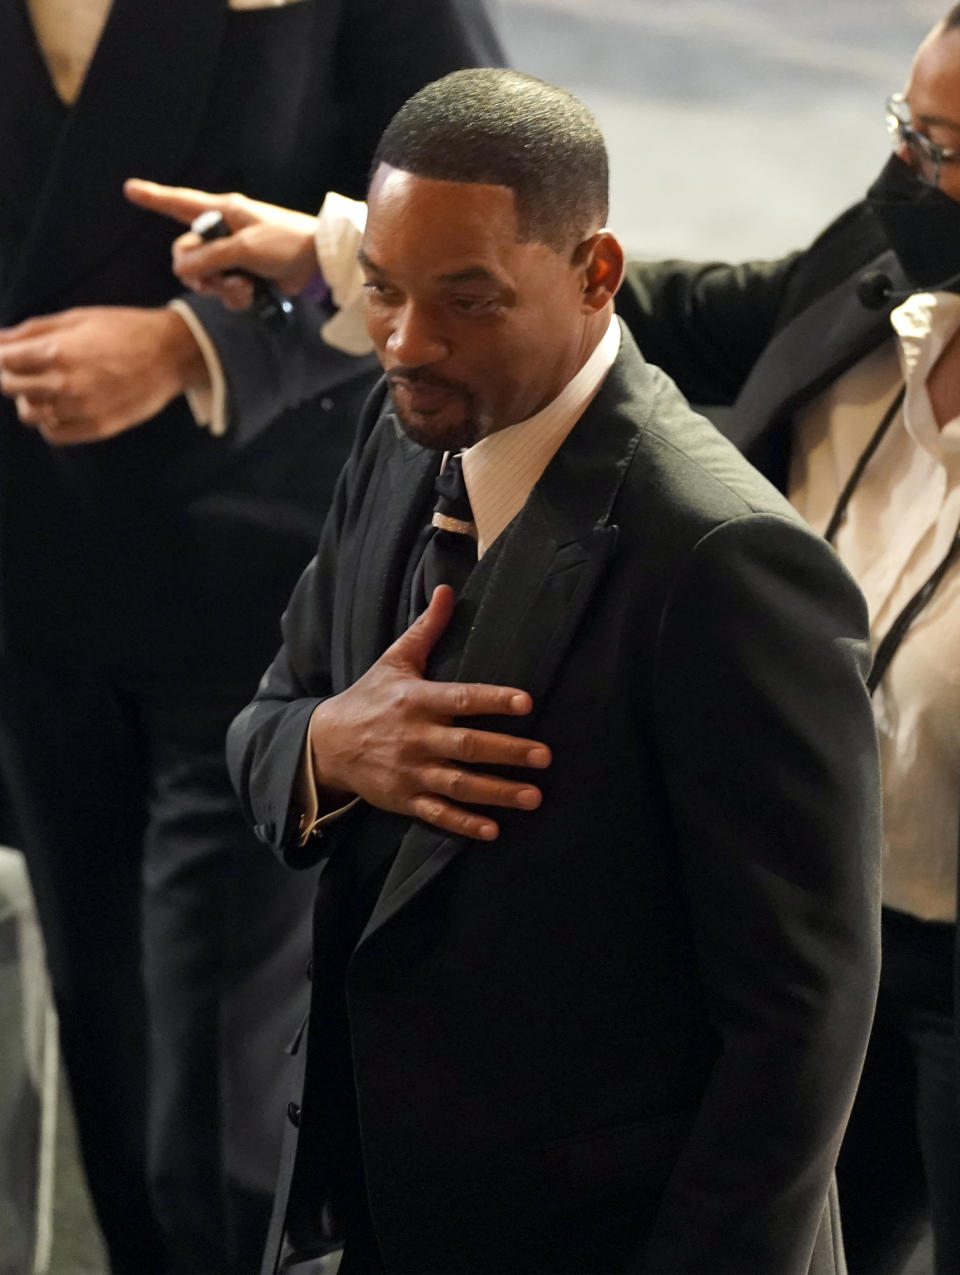 Will Smith appears in the audience at the Oscars on Sunday, March 27, 2022, at the Dolby Theatre in Los Angeles. (AP Photo/Chris Pizzello)